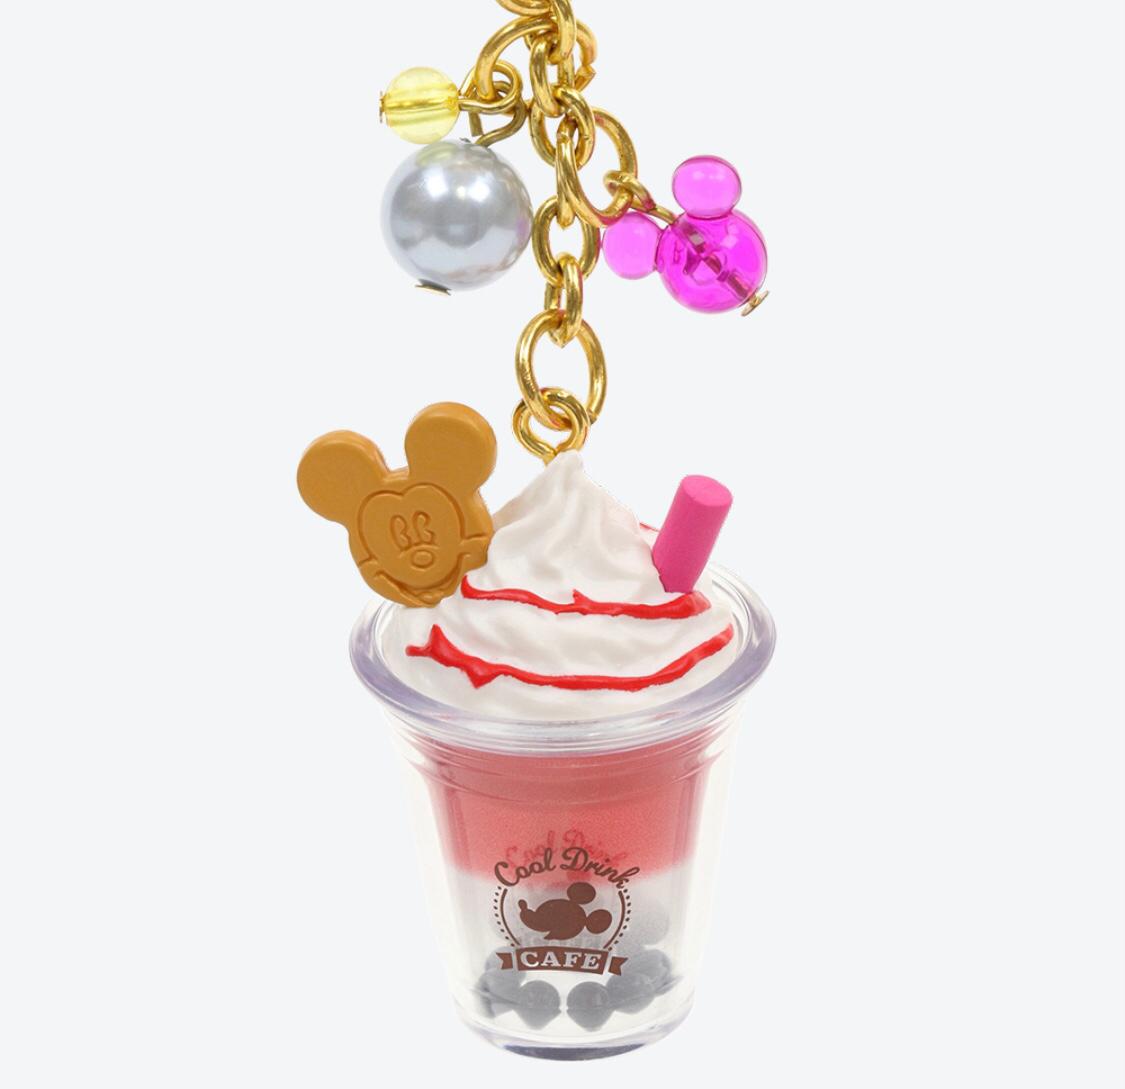 TRD - Keychain Collection - Bubble tea set of 3